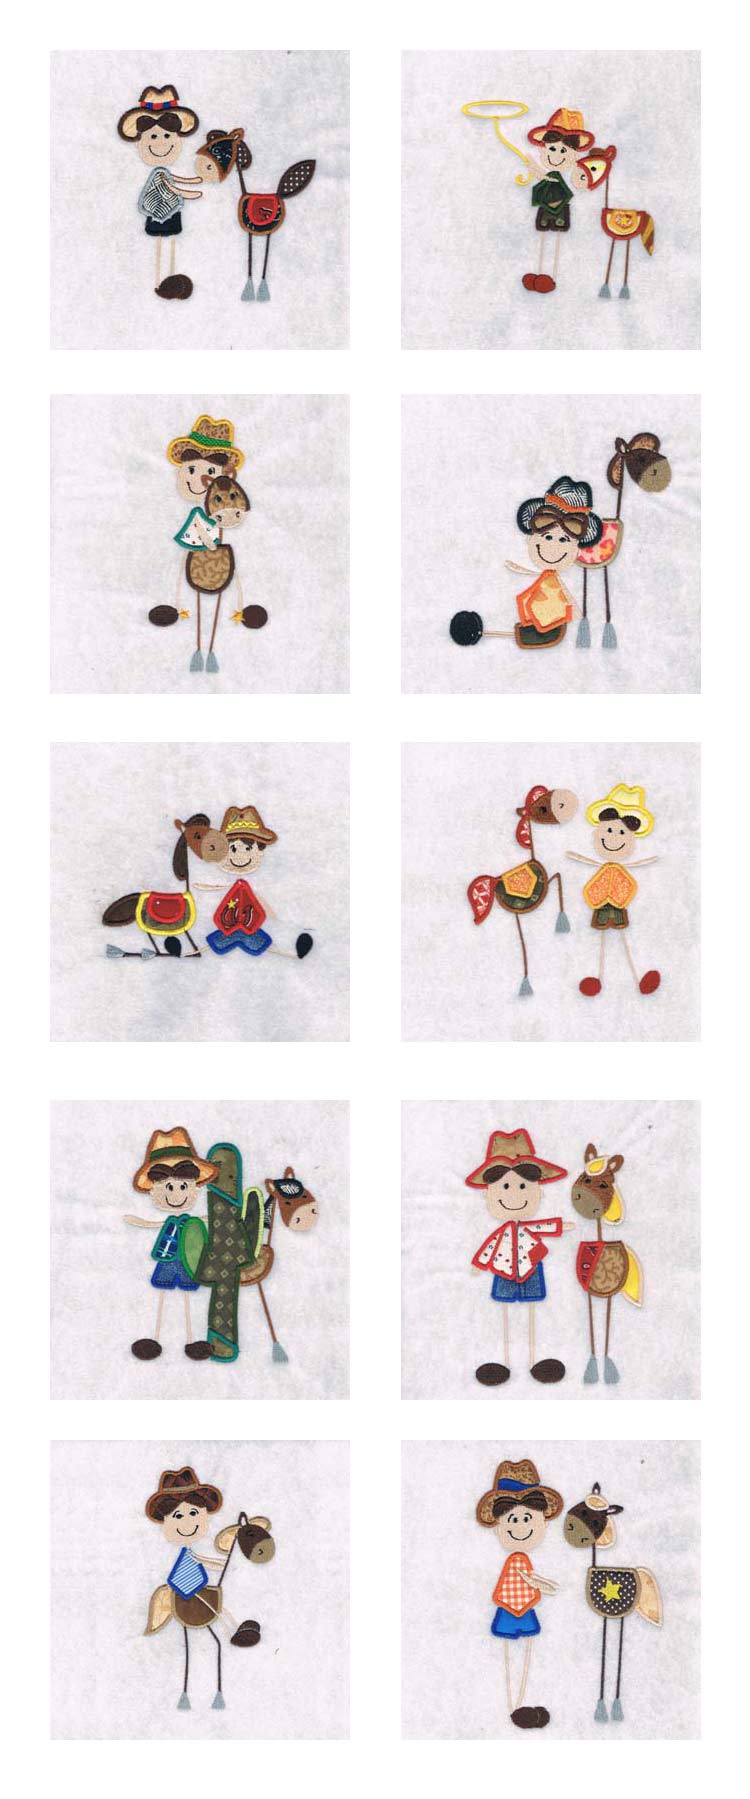 Patchy Cowboys and Horses Embroidery Machine Design Details